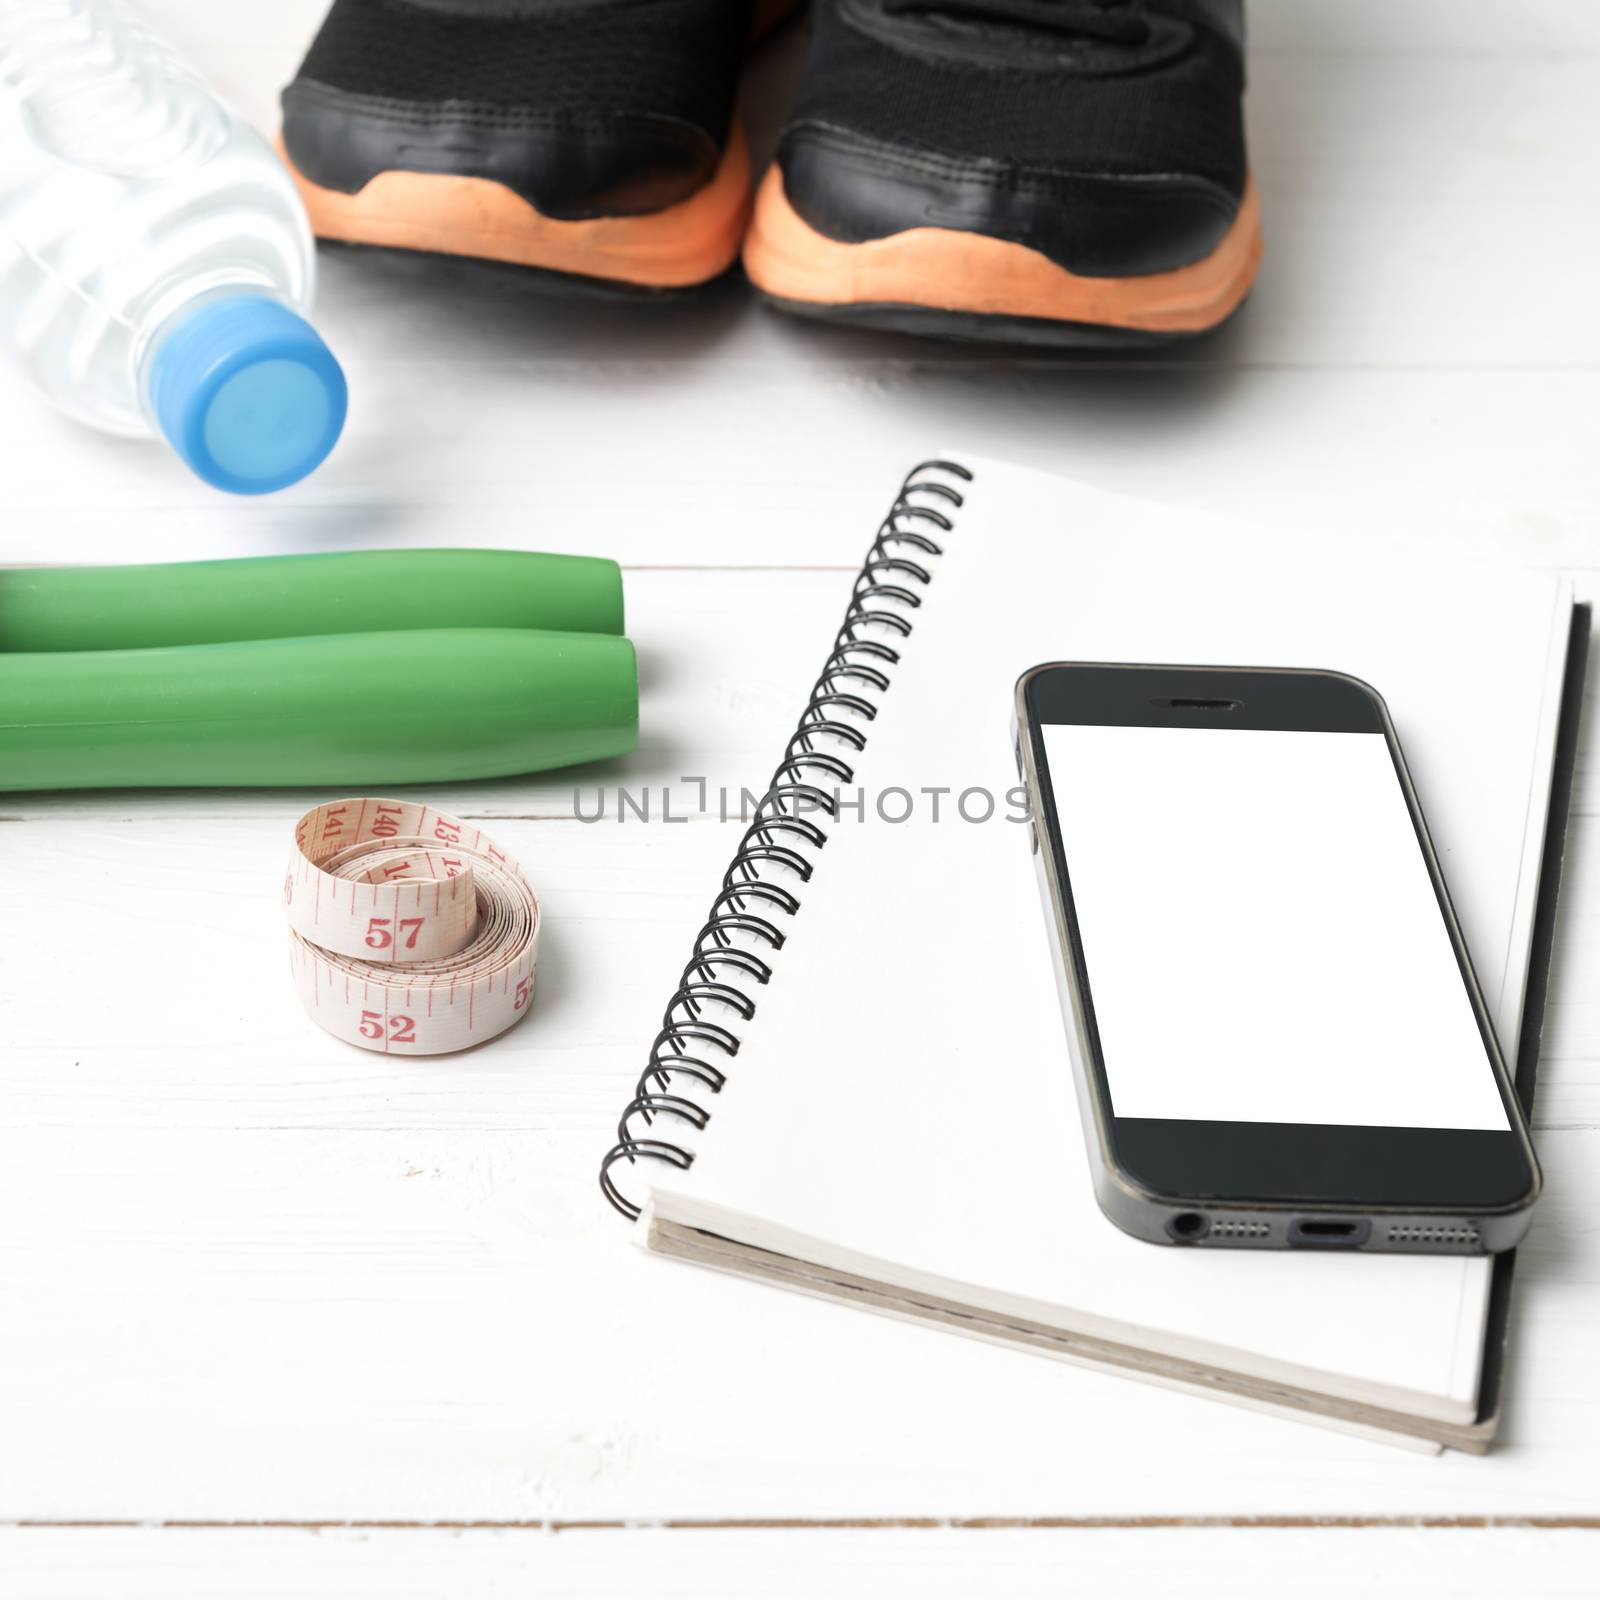 fitness equipment : running shoes,jumping rope,drinking water,notebook,measuring tape and phone on white wood table